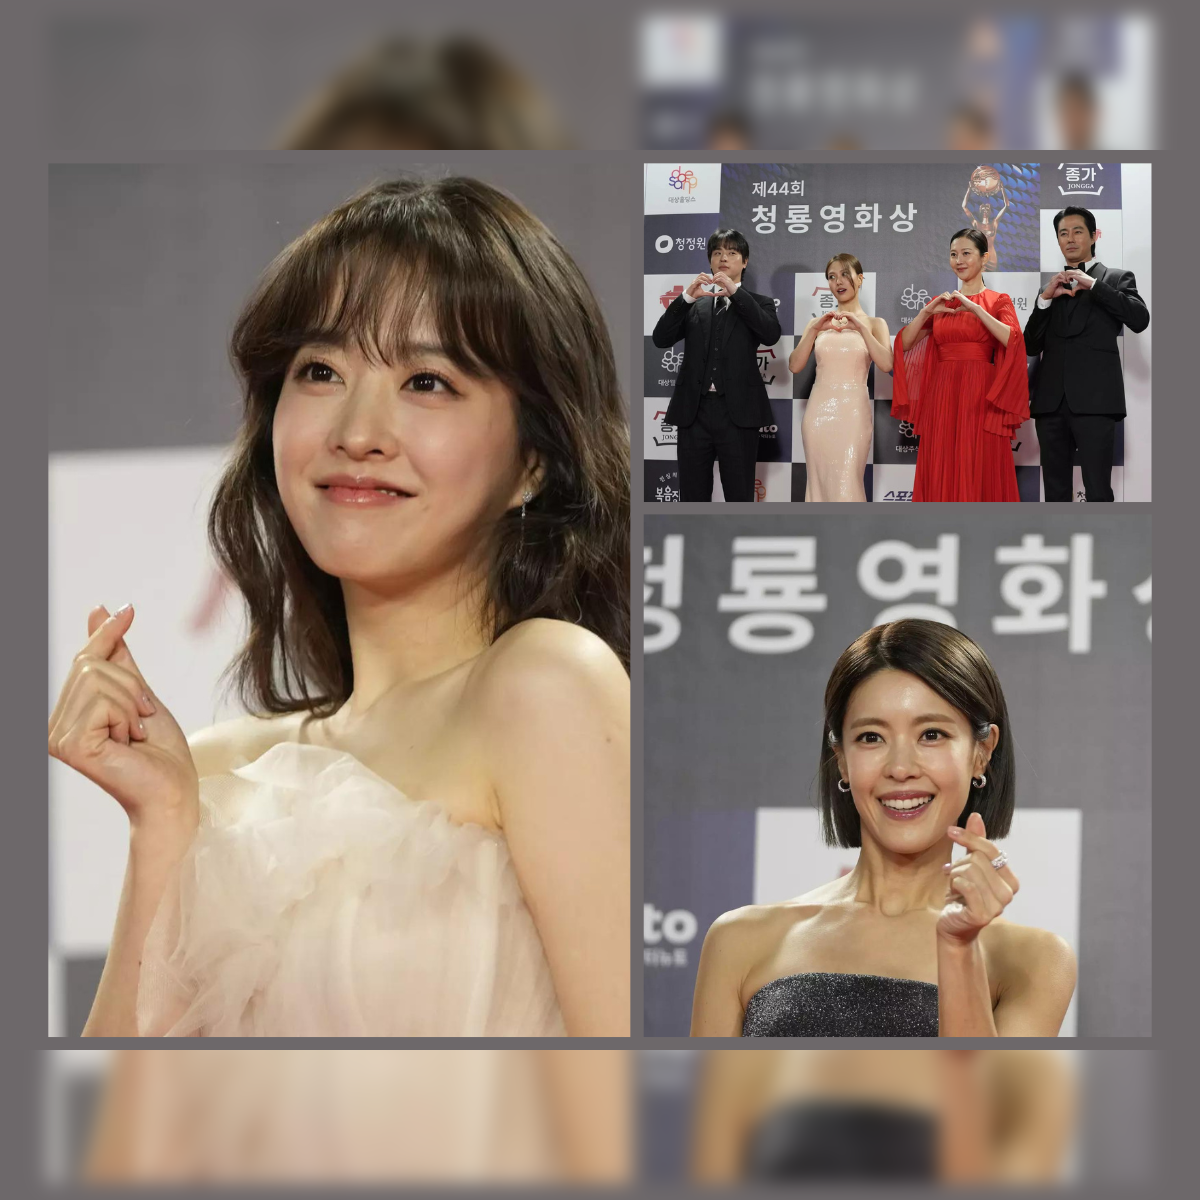 South Korean actress Go Min-Si and shares her hot take on the brand, a